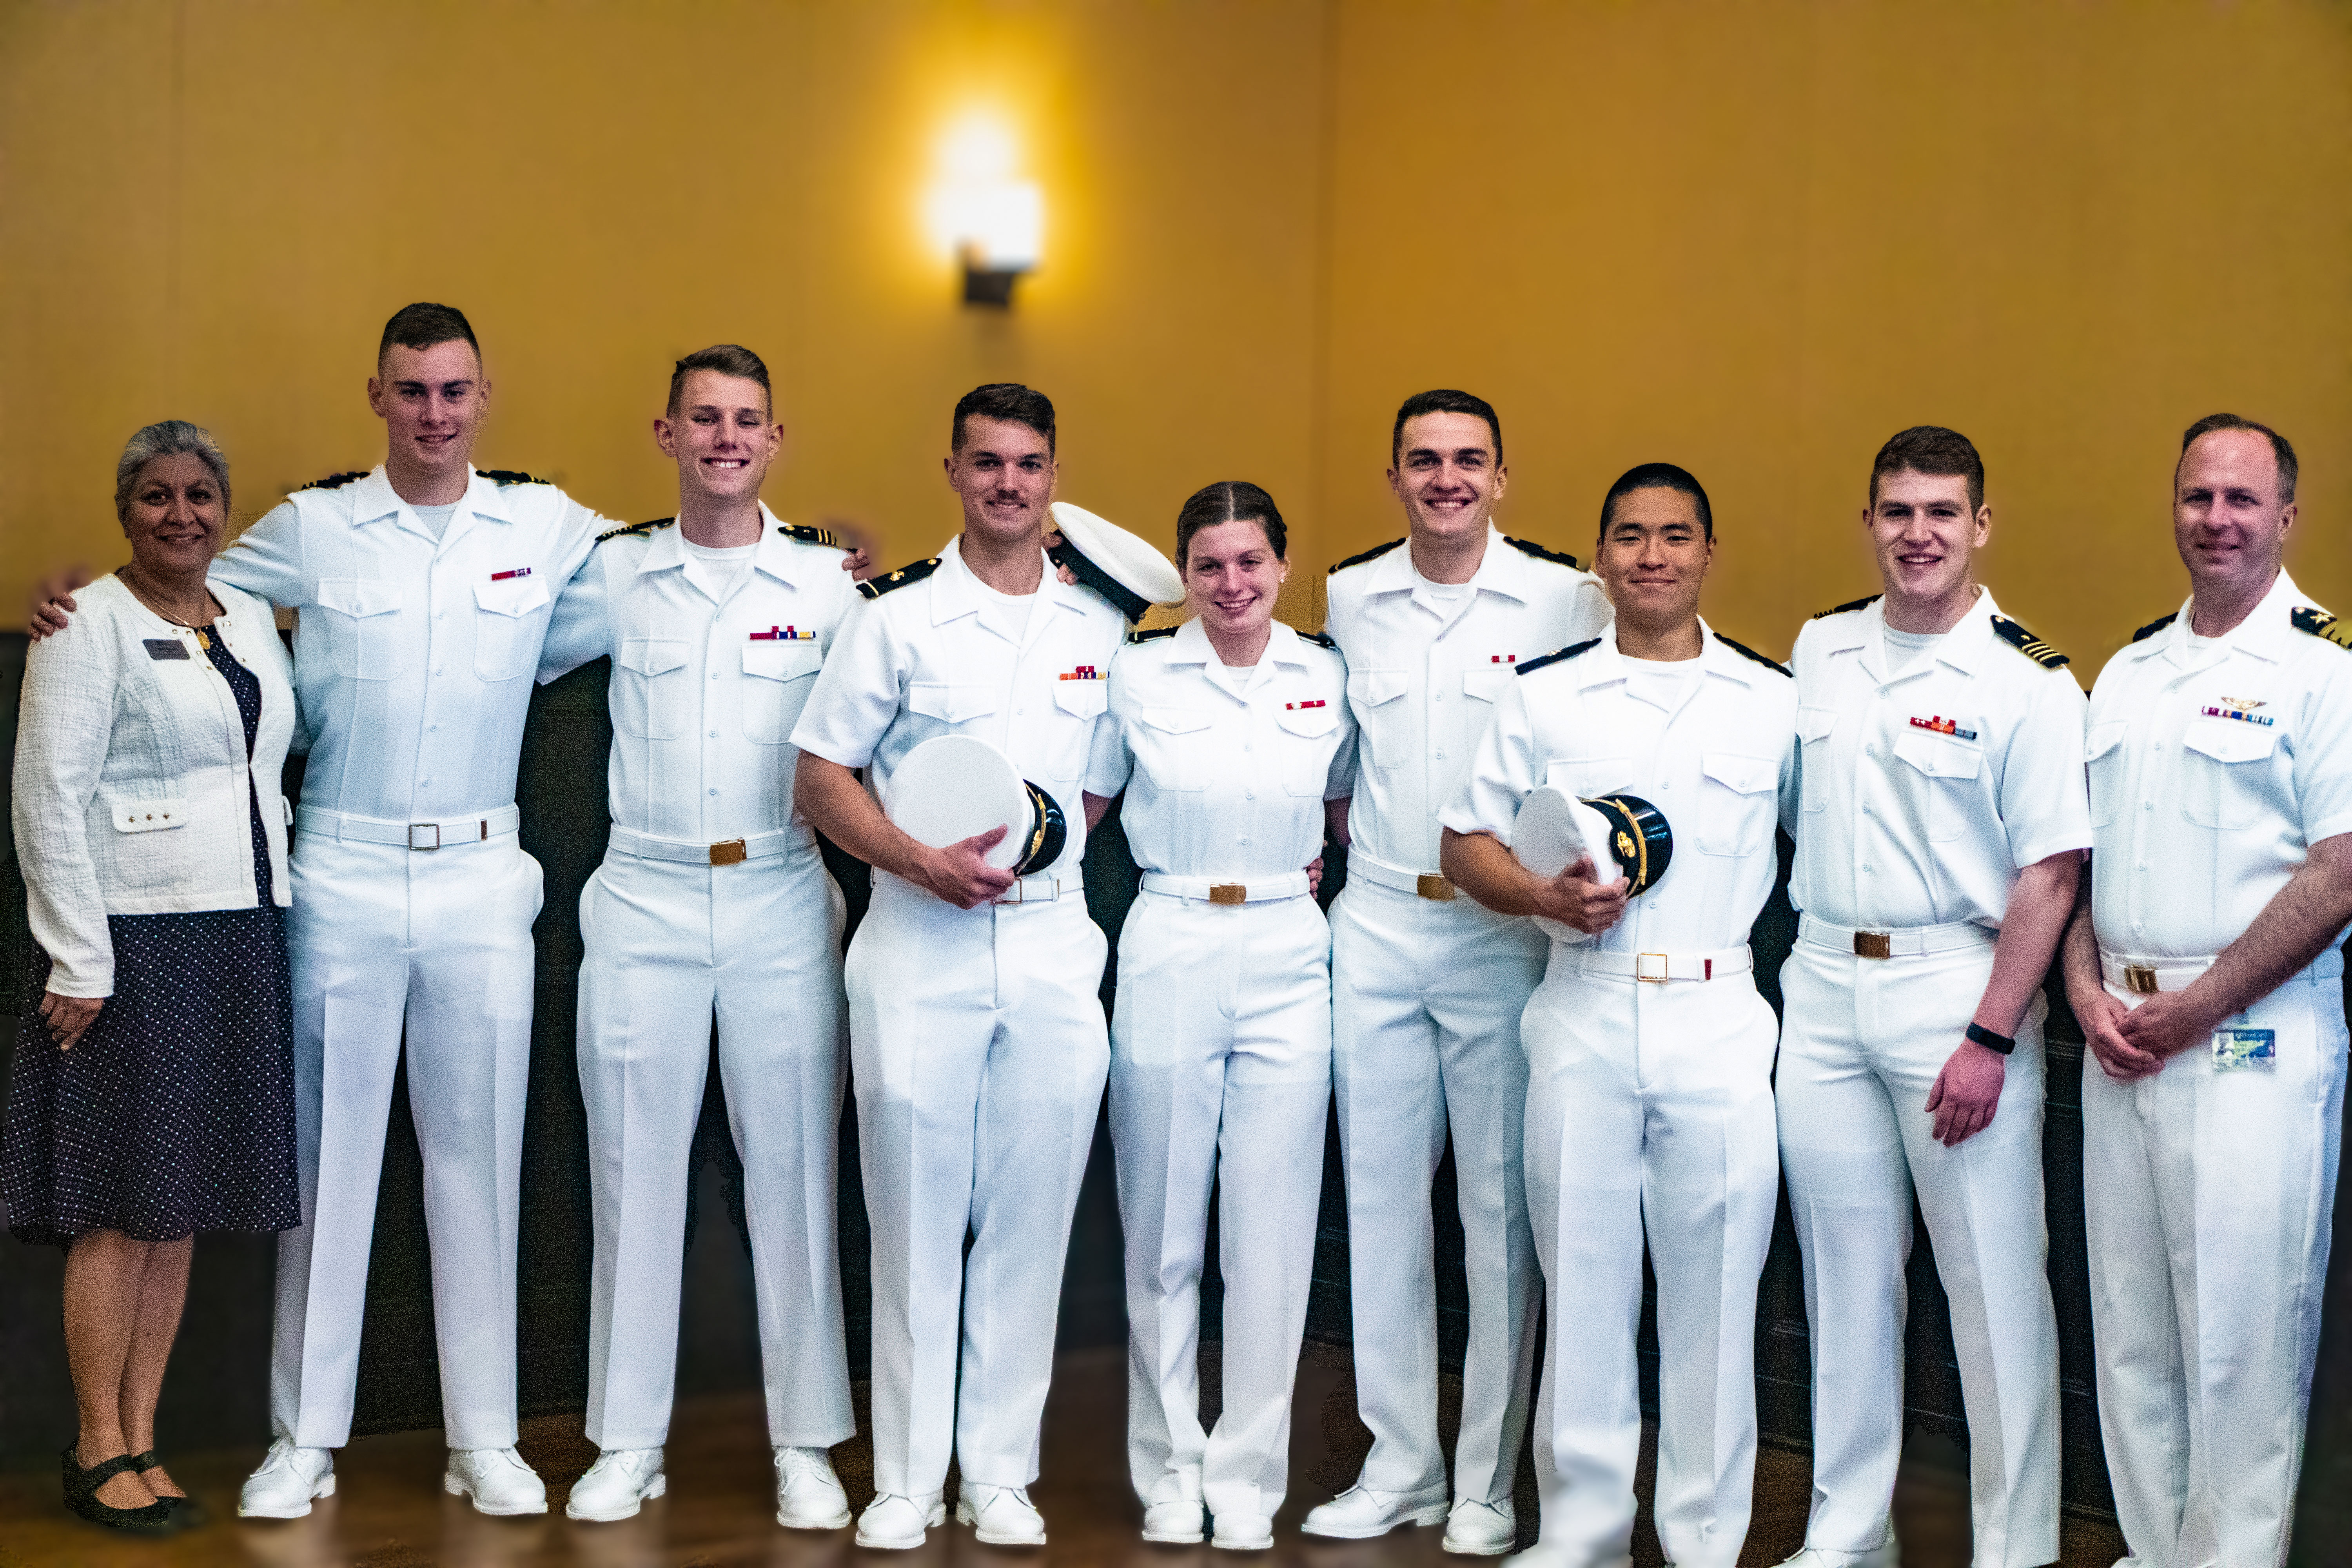 Students in naval uniforms stand together